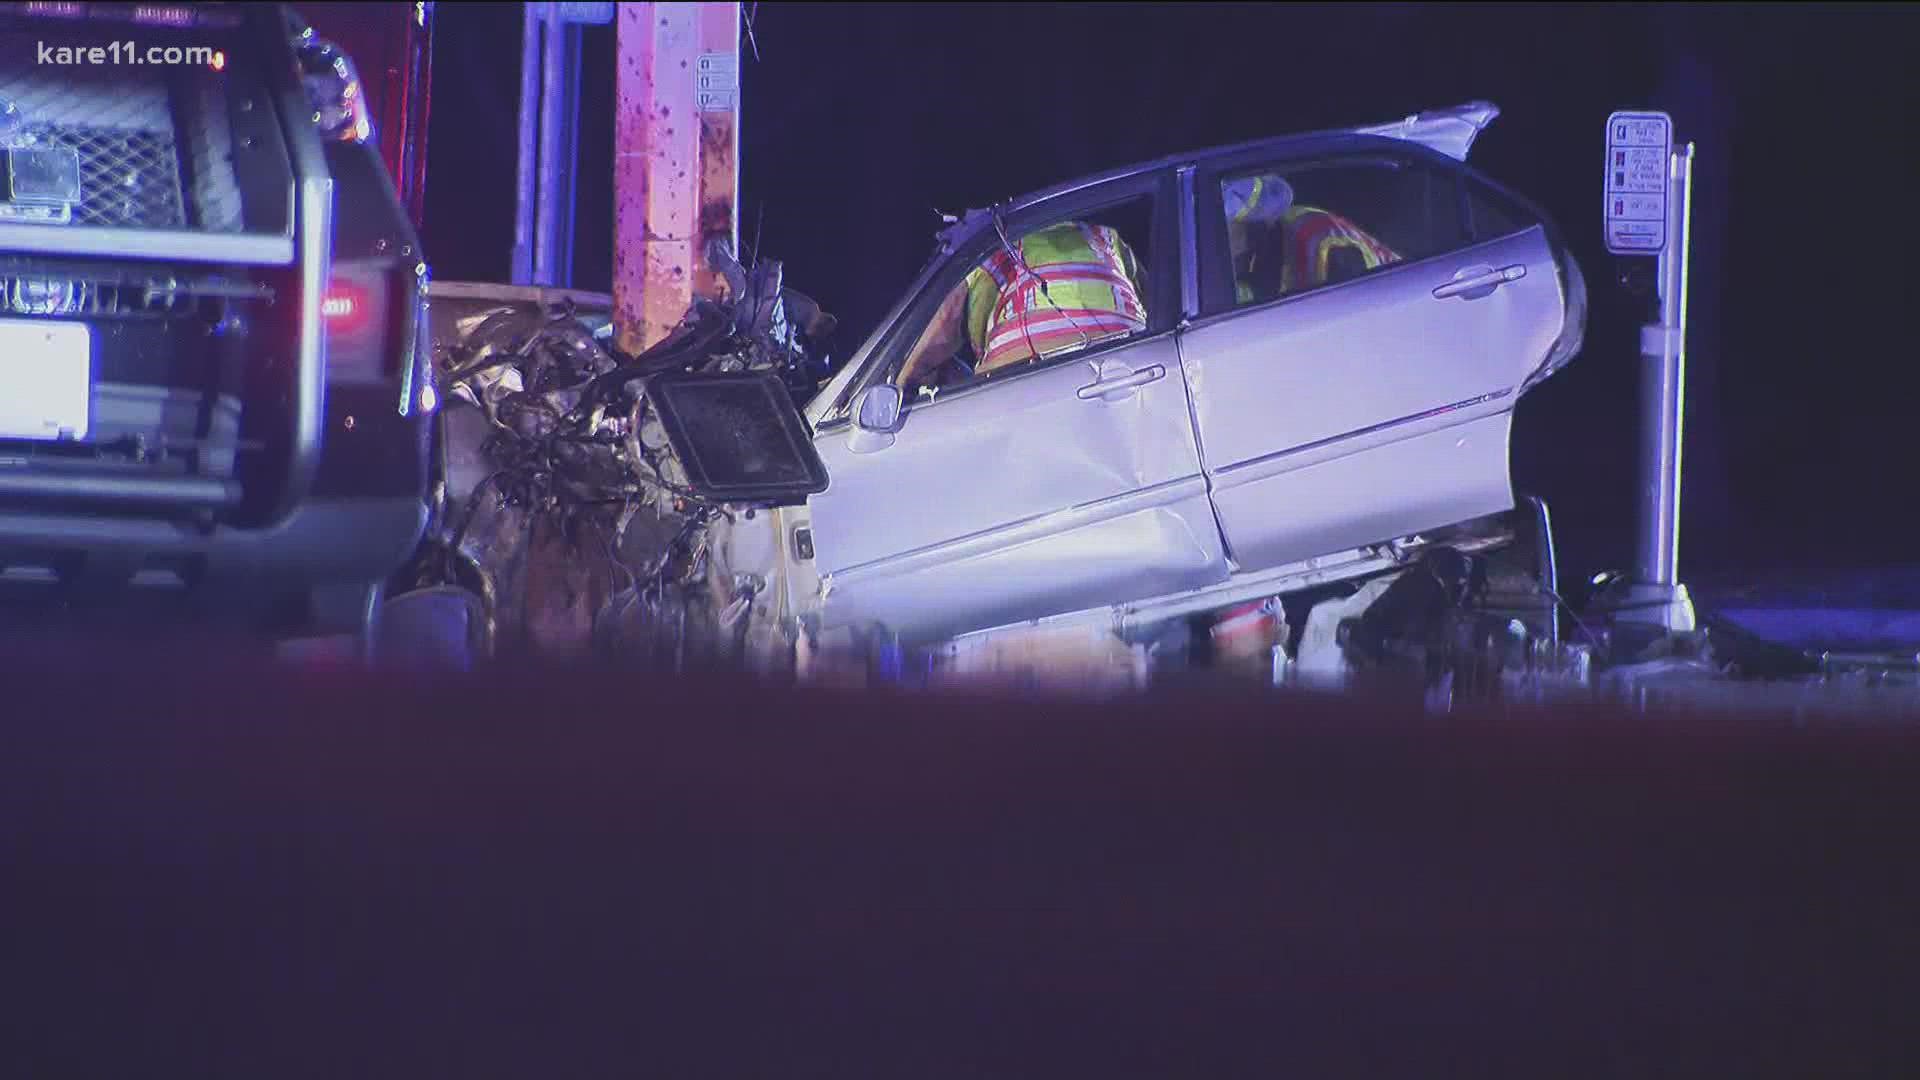 Minnesota State Patrol says a driver was going too fast when they hit a pole and sheared their car in half.